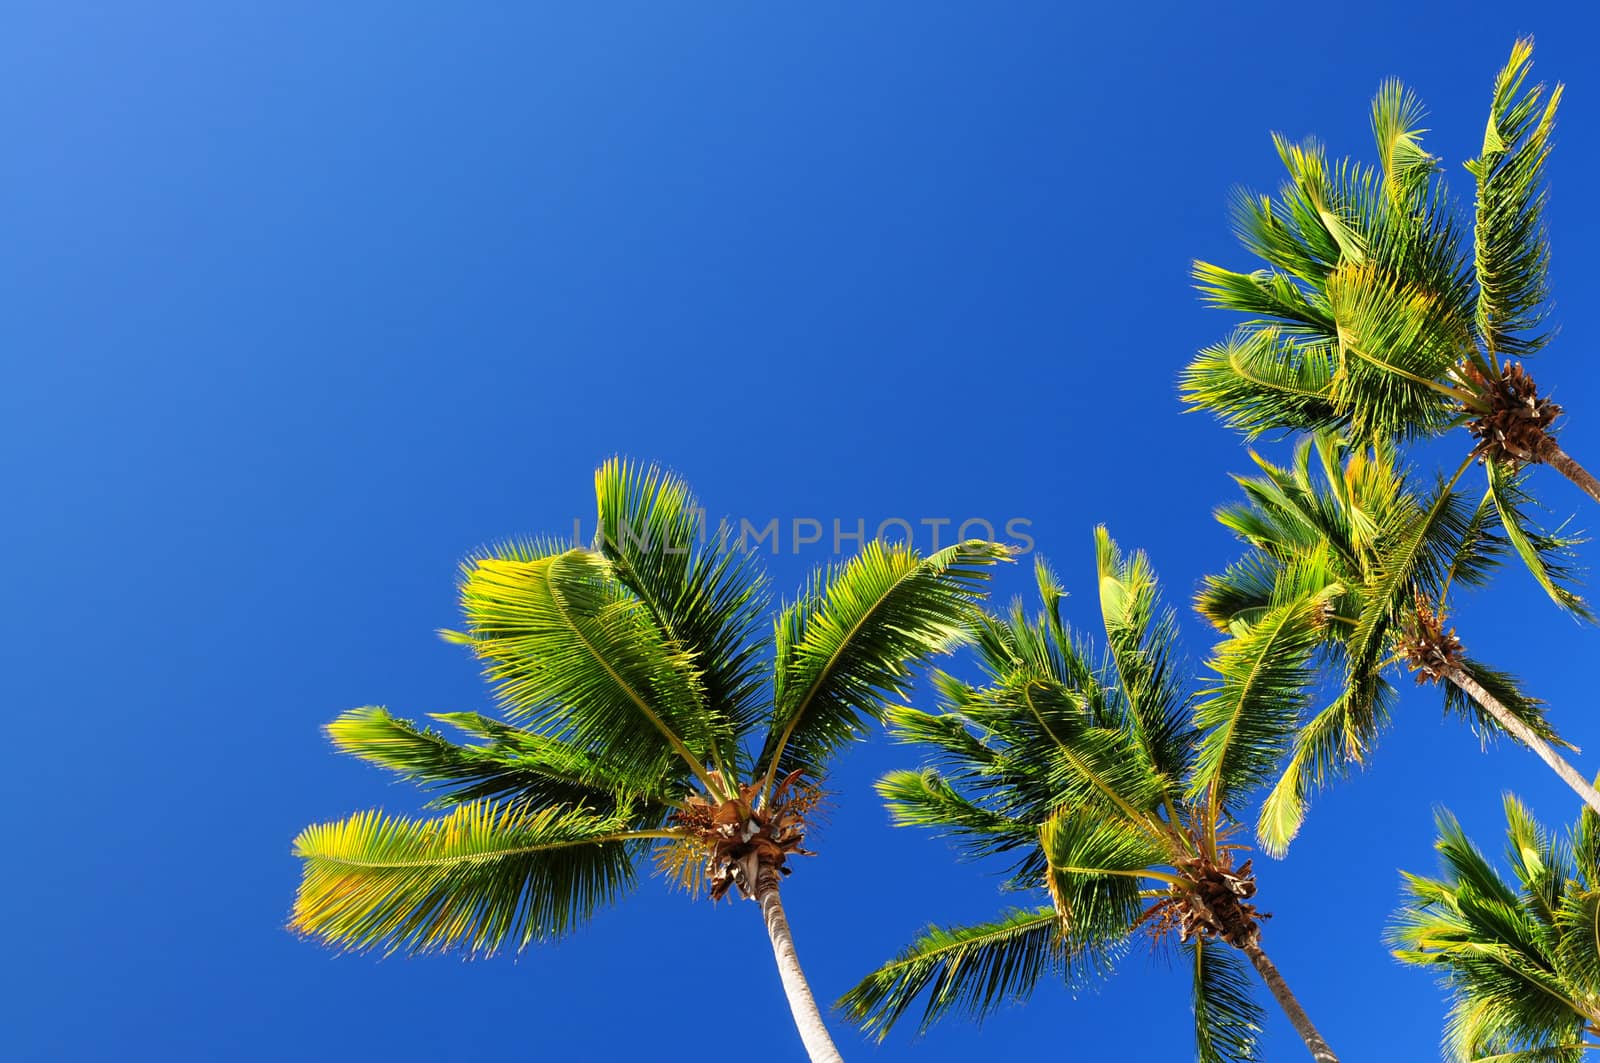 Lush green palm trees on blue sky background